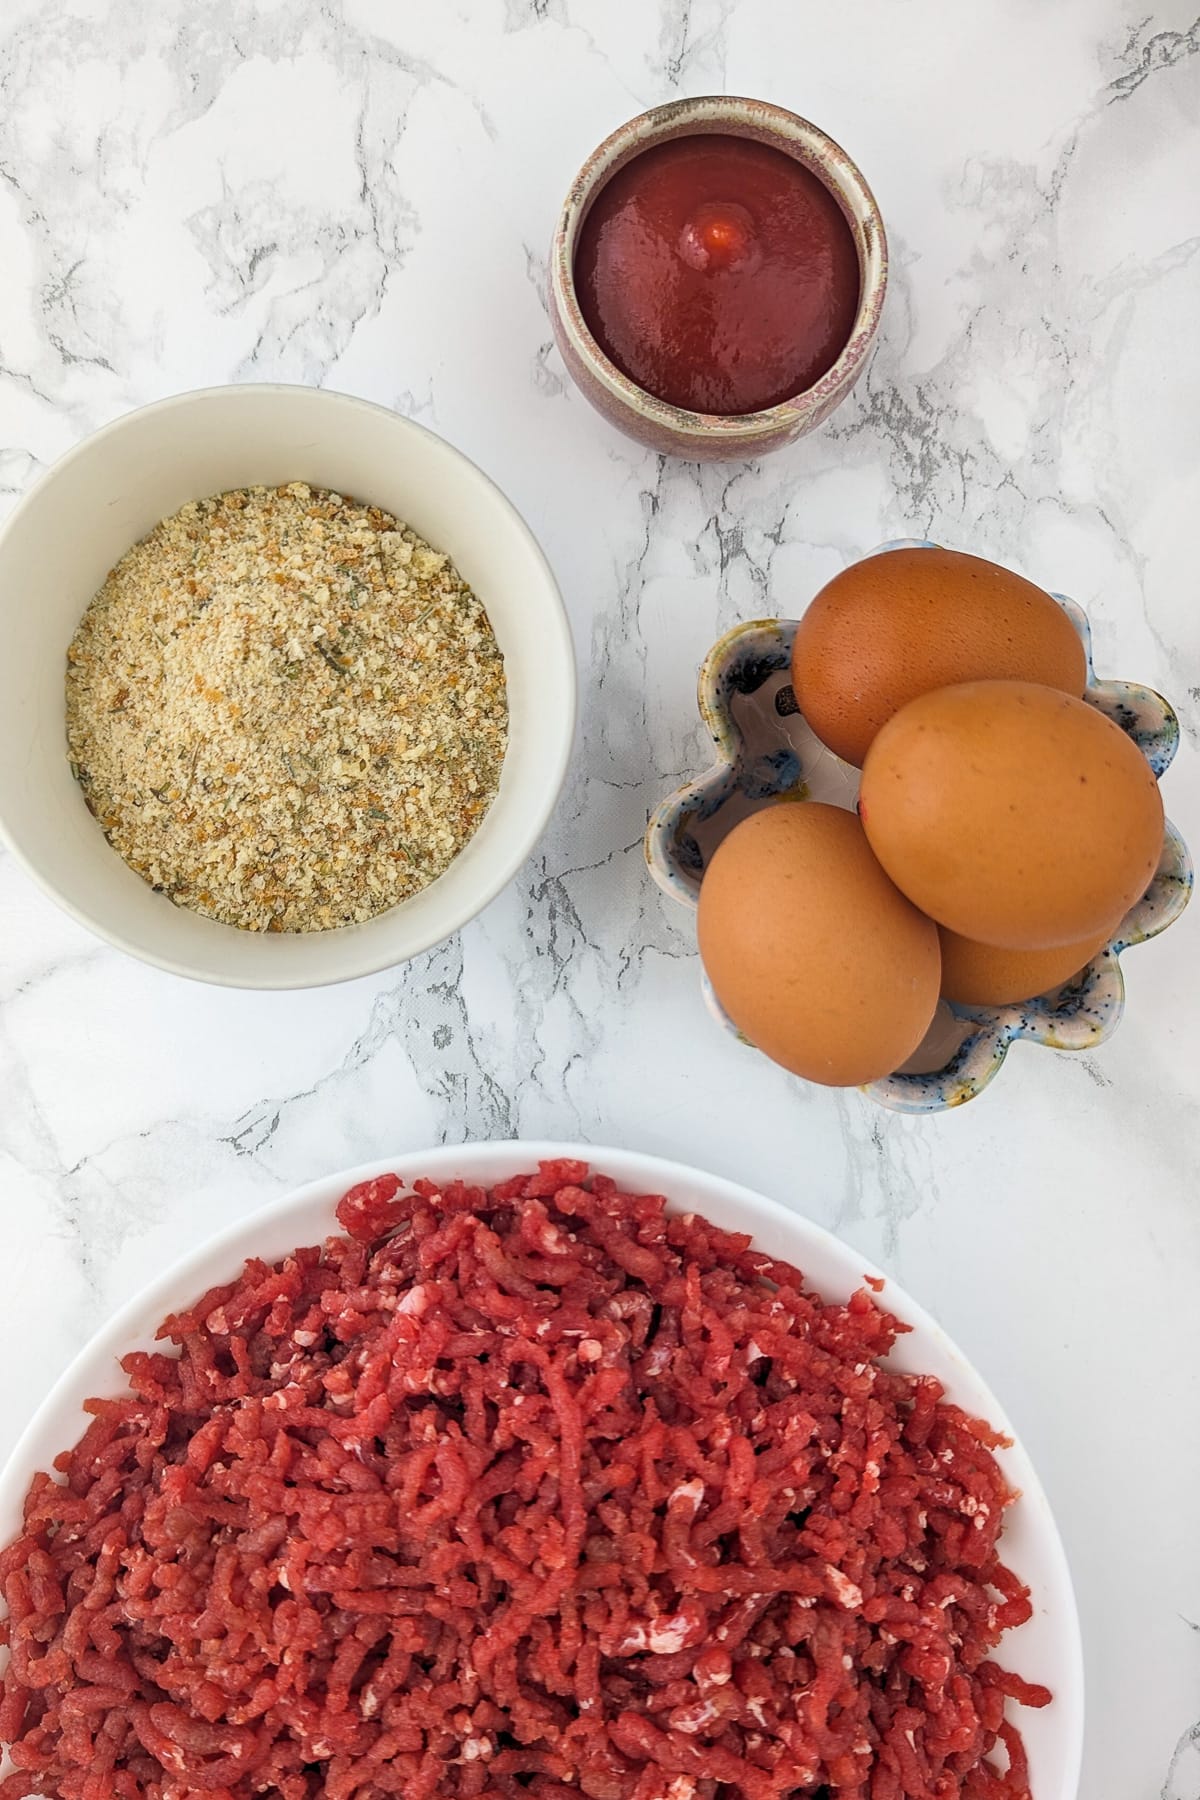 Top view of a white bowl with ground beef, 4 eggs, ketchup, breadcrumbs, and spices.